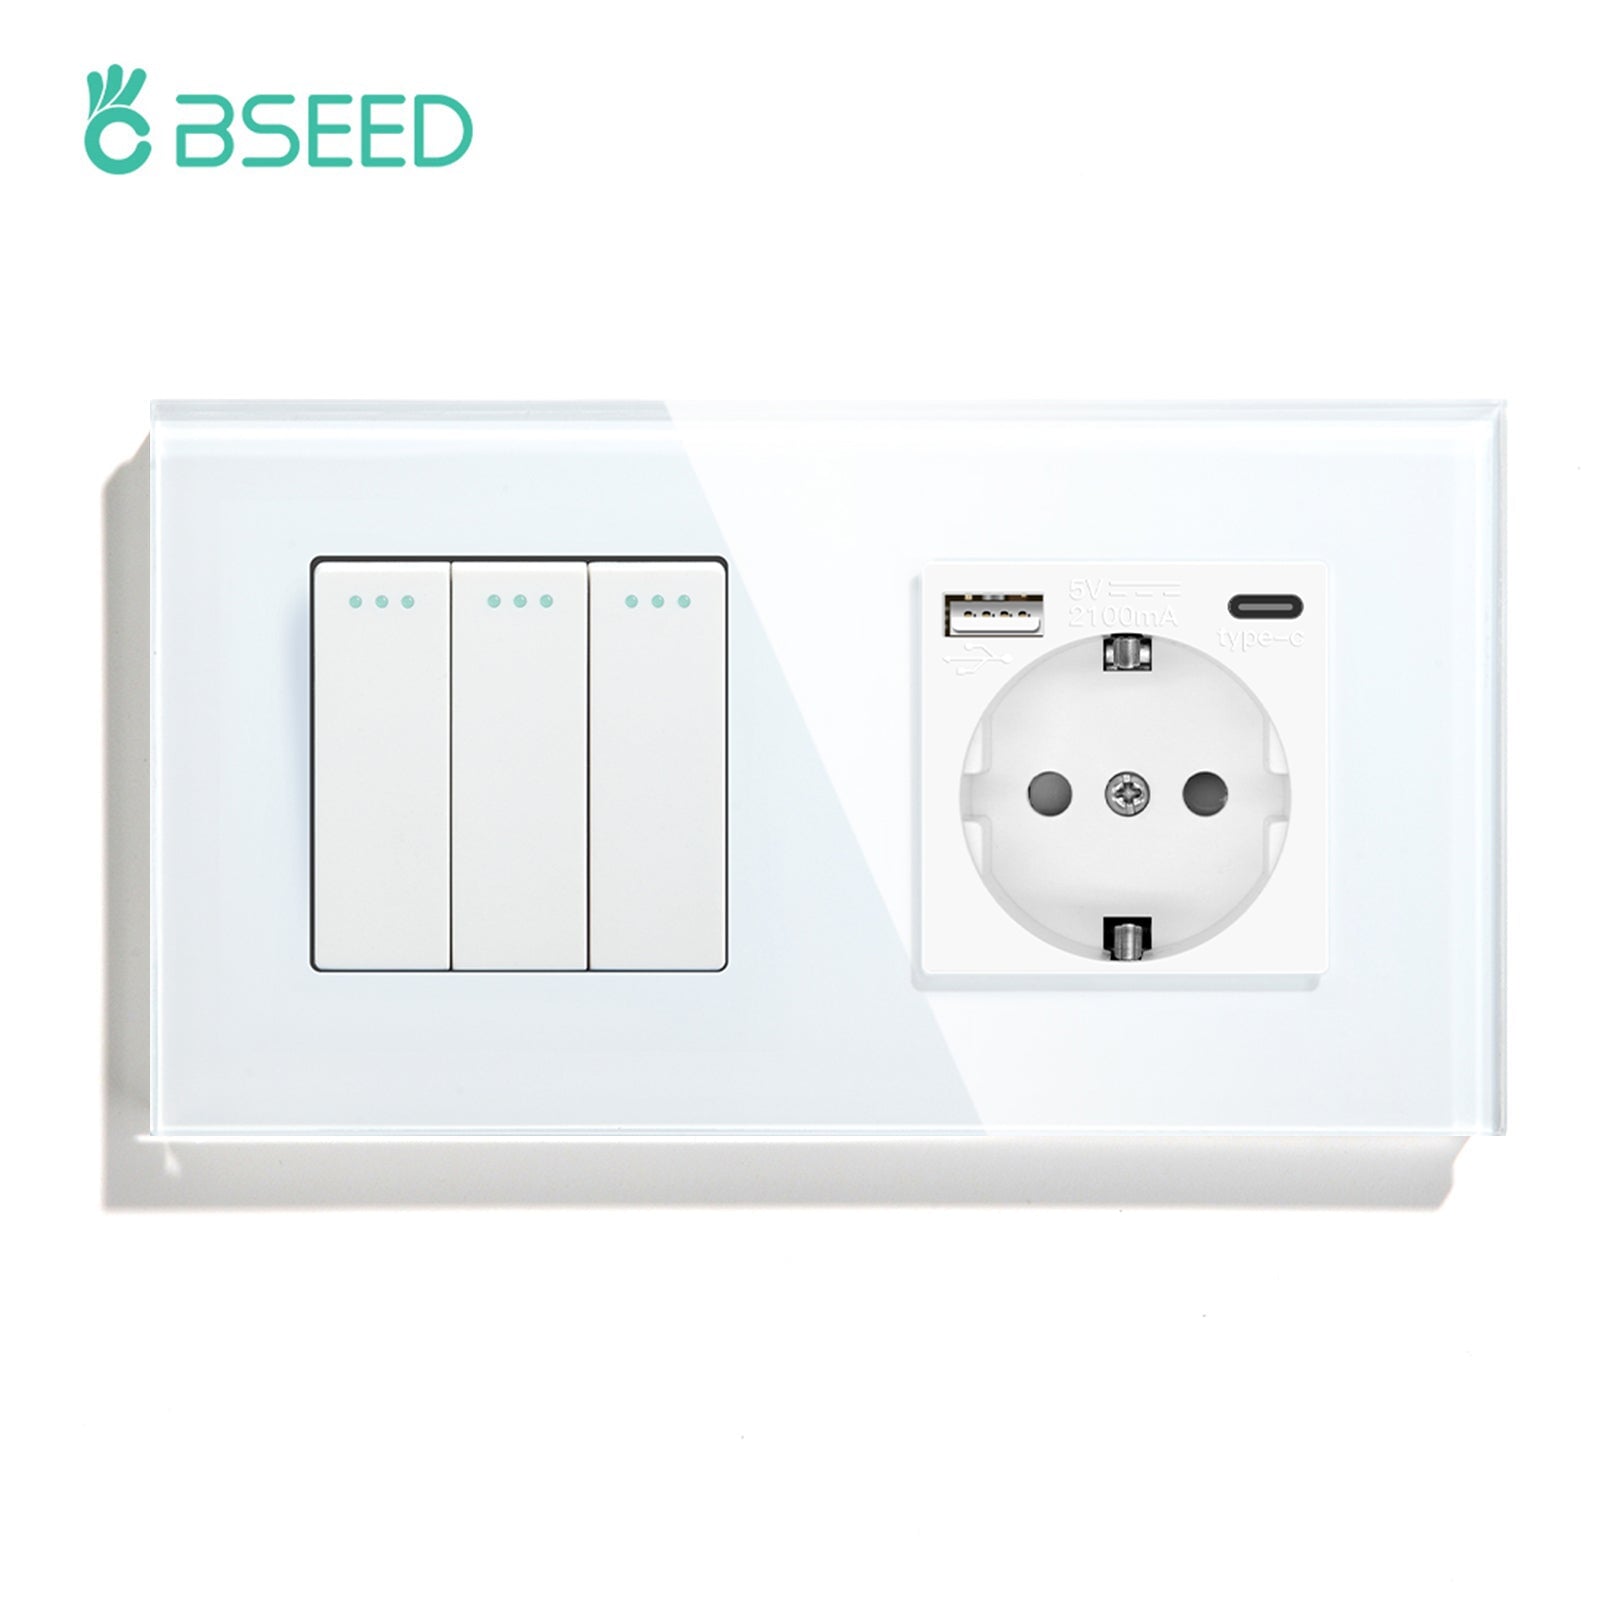 BSEED Mechanical 1/2/3 Gang 1/2Way Touch Light Switch With Normal Eu Socket with typcs-c Power Outlets & Sockets Bseedswitch White 3Gang 1Way